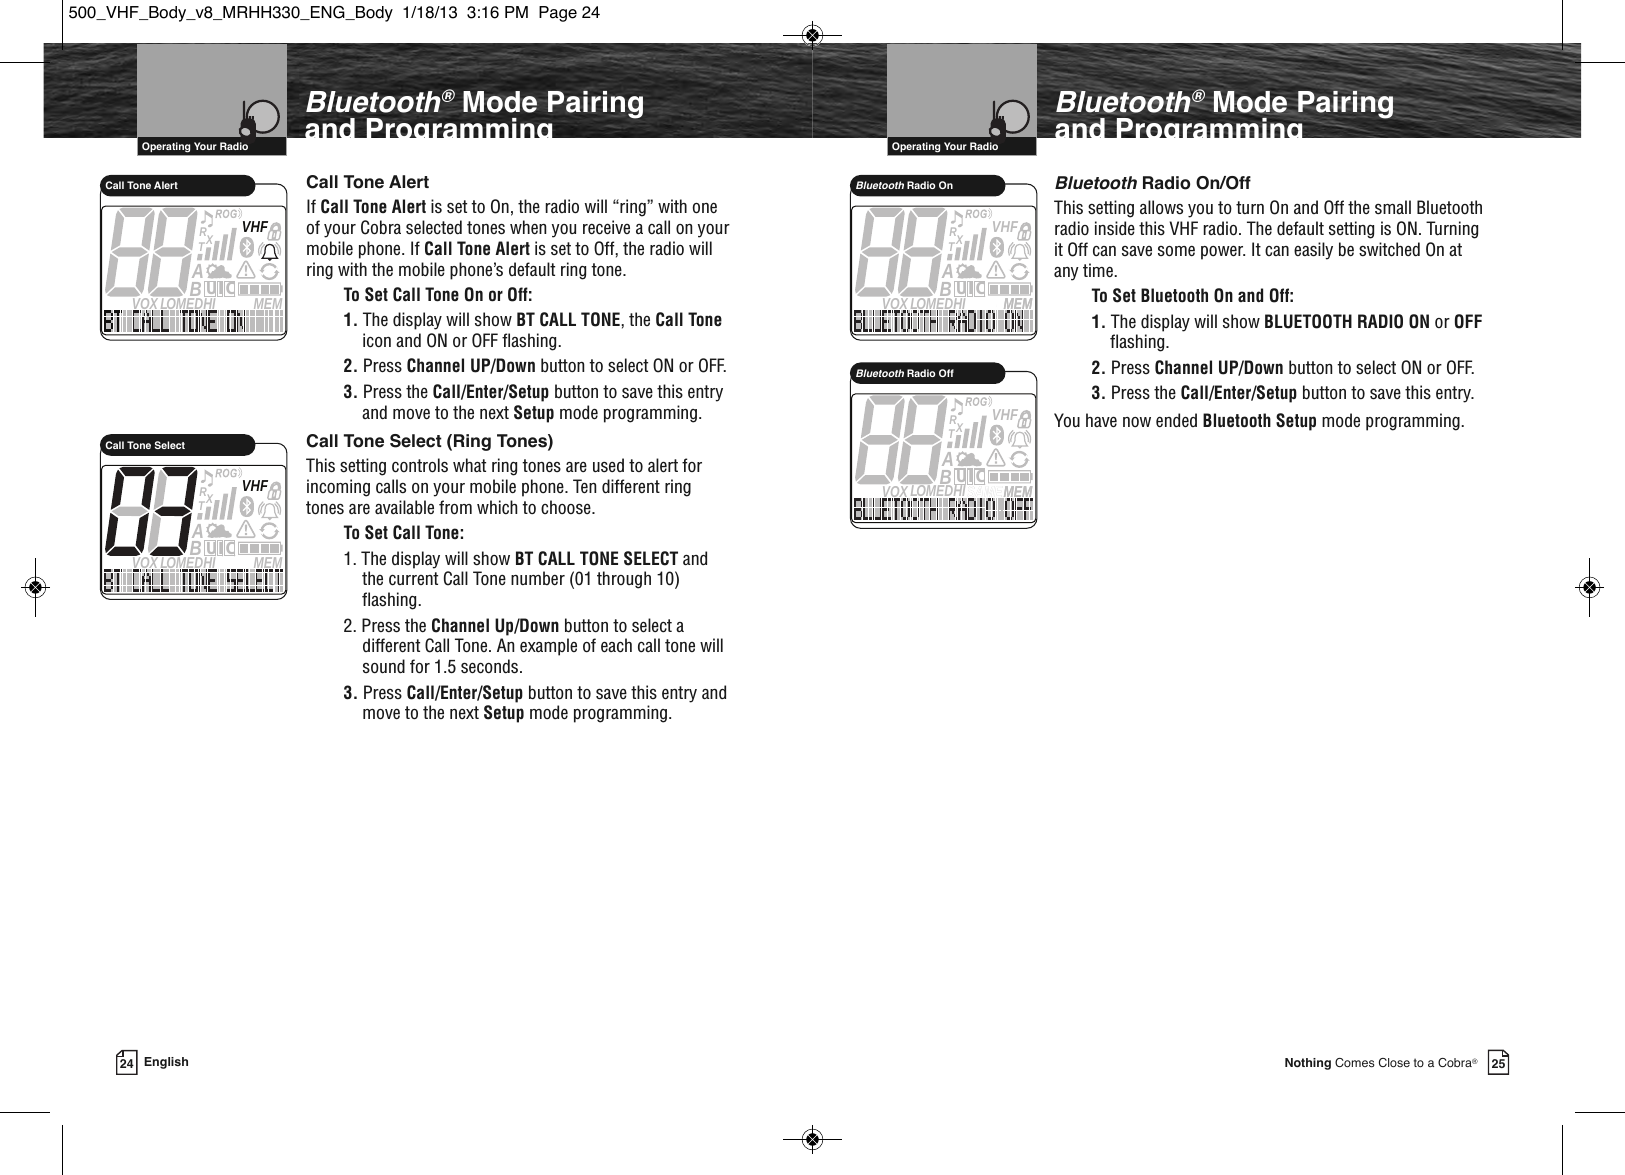 Page 15 of Cobra Electronics MRHH500 BT ACCESSORY IN MARINE RADIO User Manual MRHH330 ENG Body